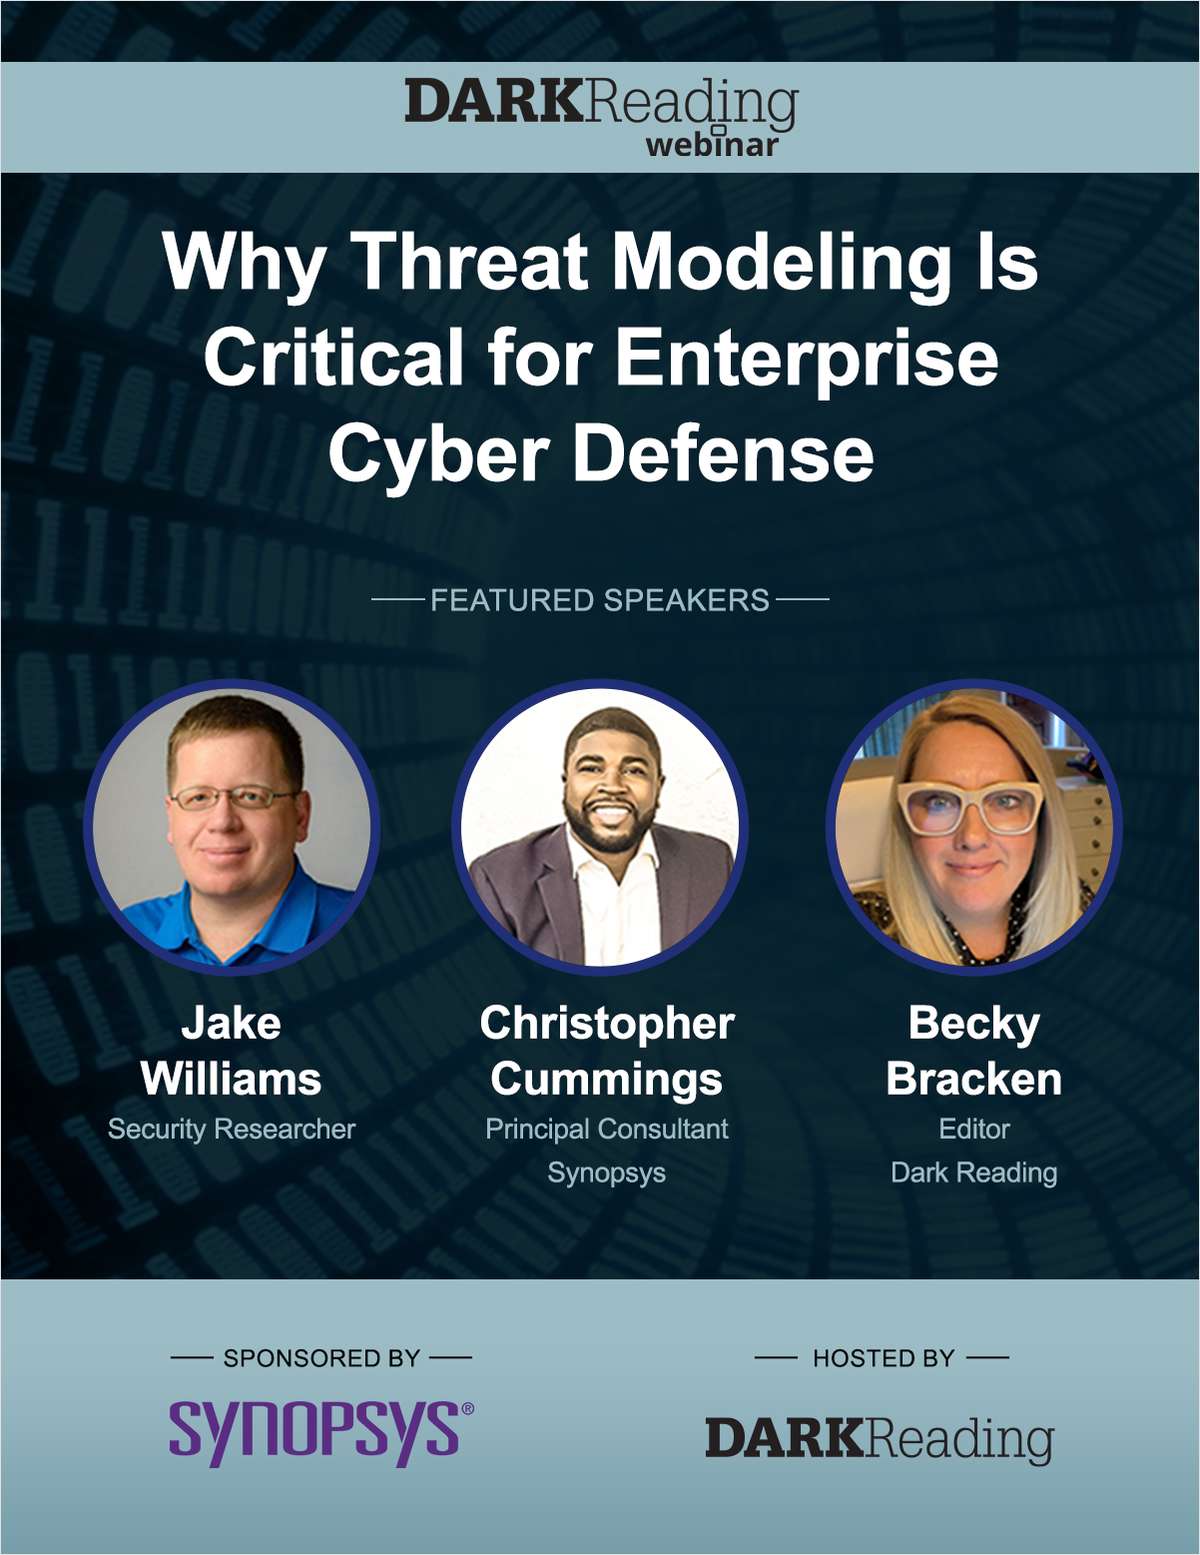 Why Threat Modeling Is Critical for Enterprise Cyber Defense